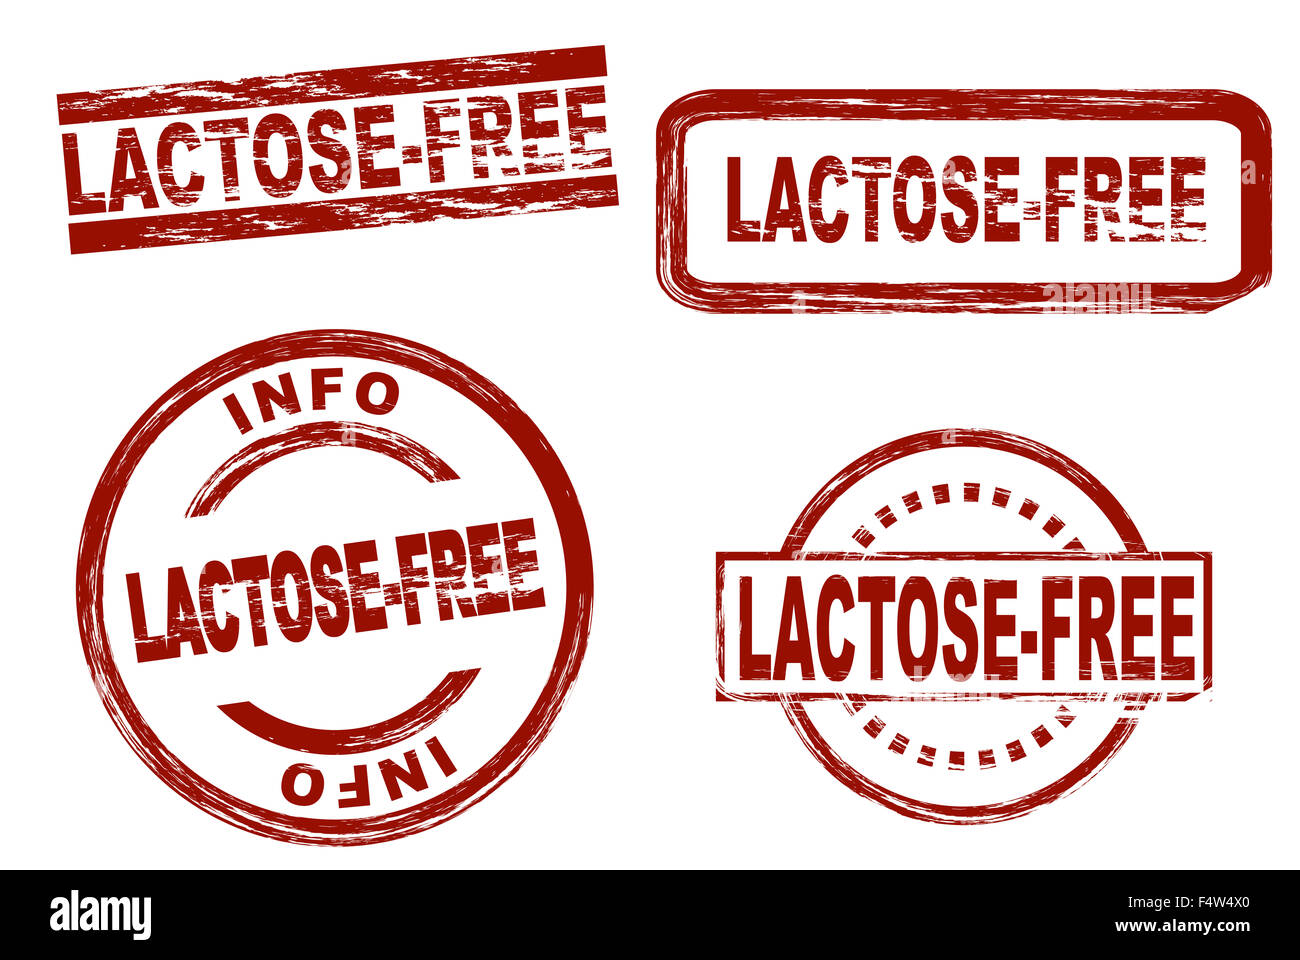 Set of stylized red stamps showing the term lactose-free. All on white background. Stock Photo